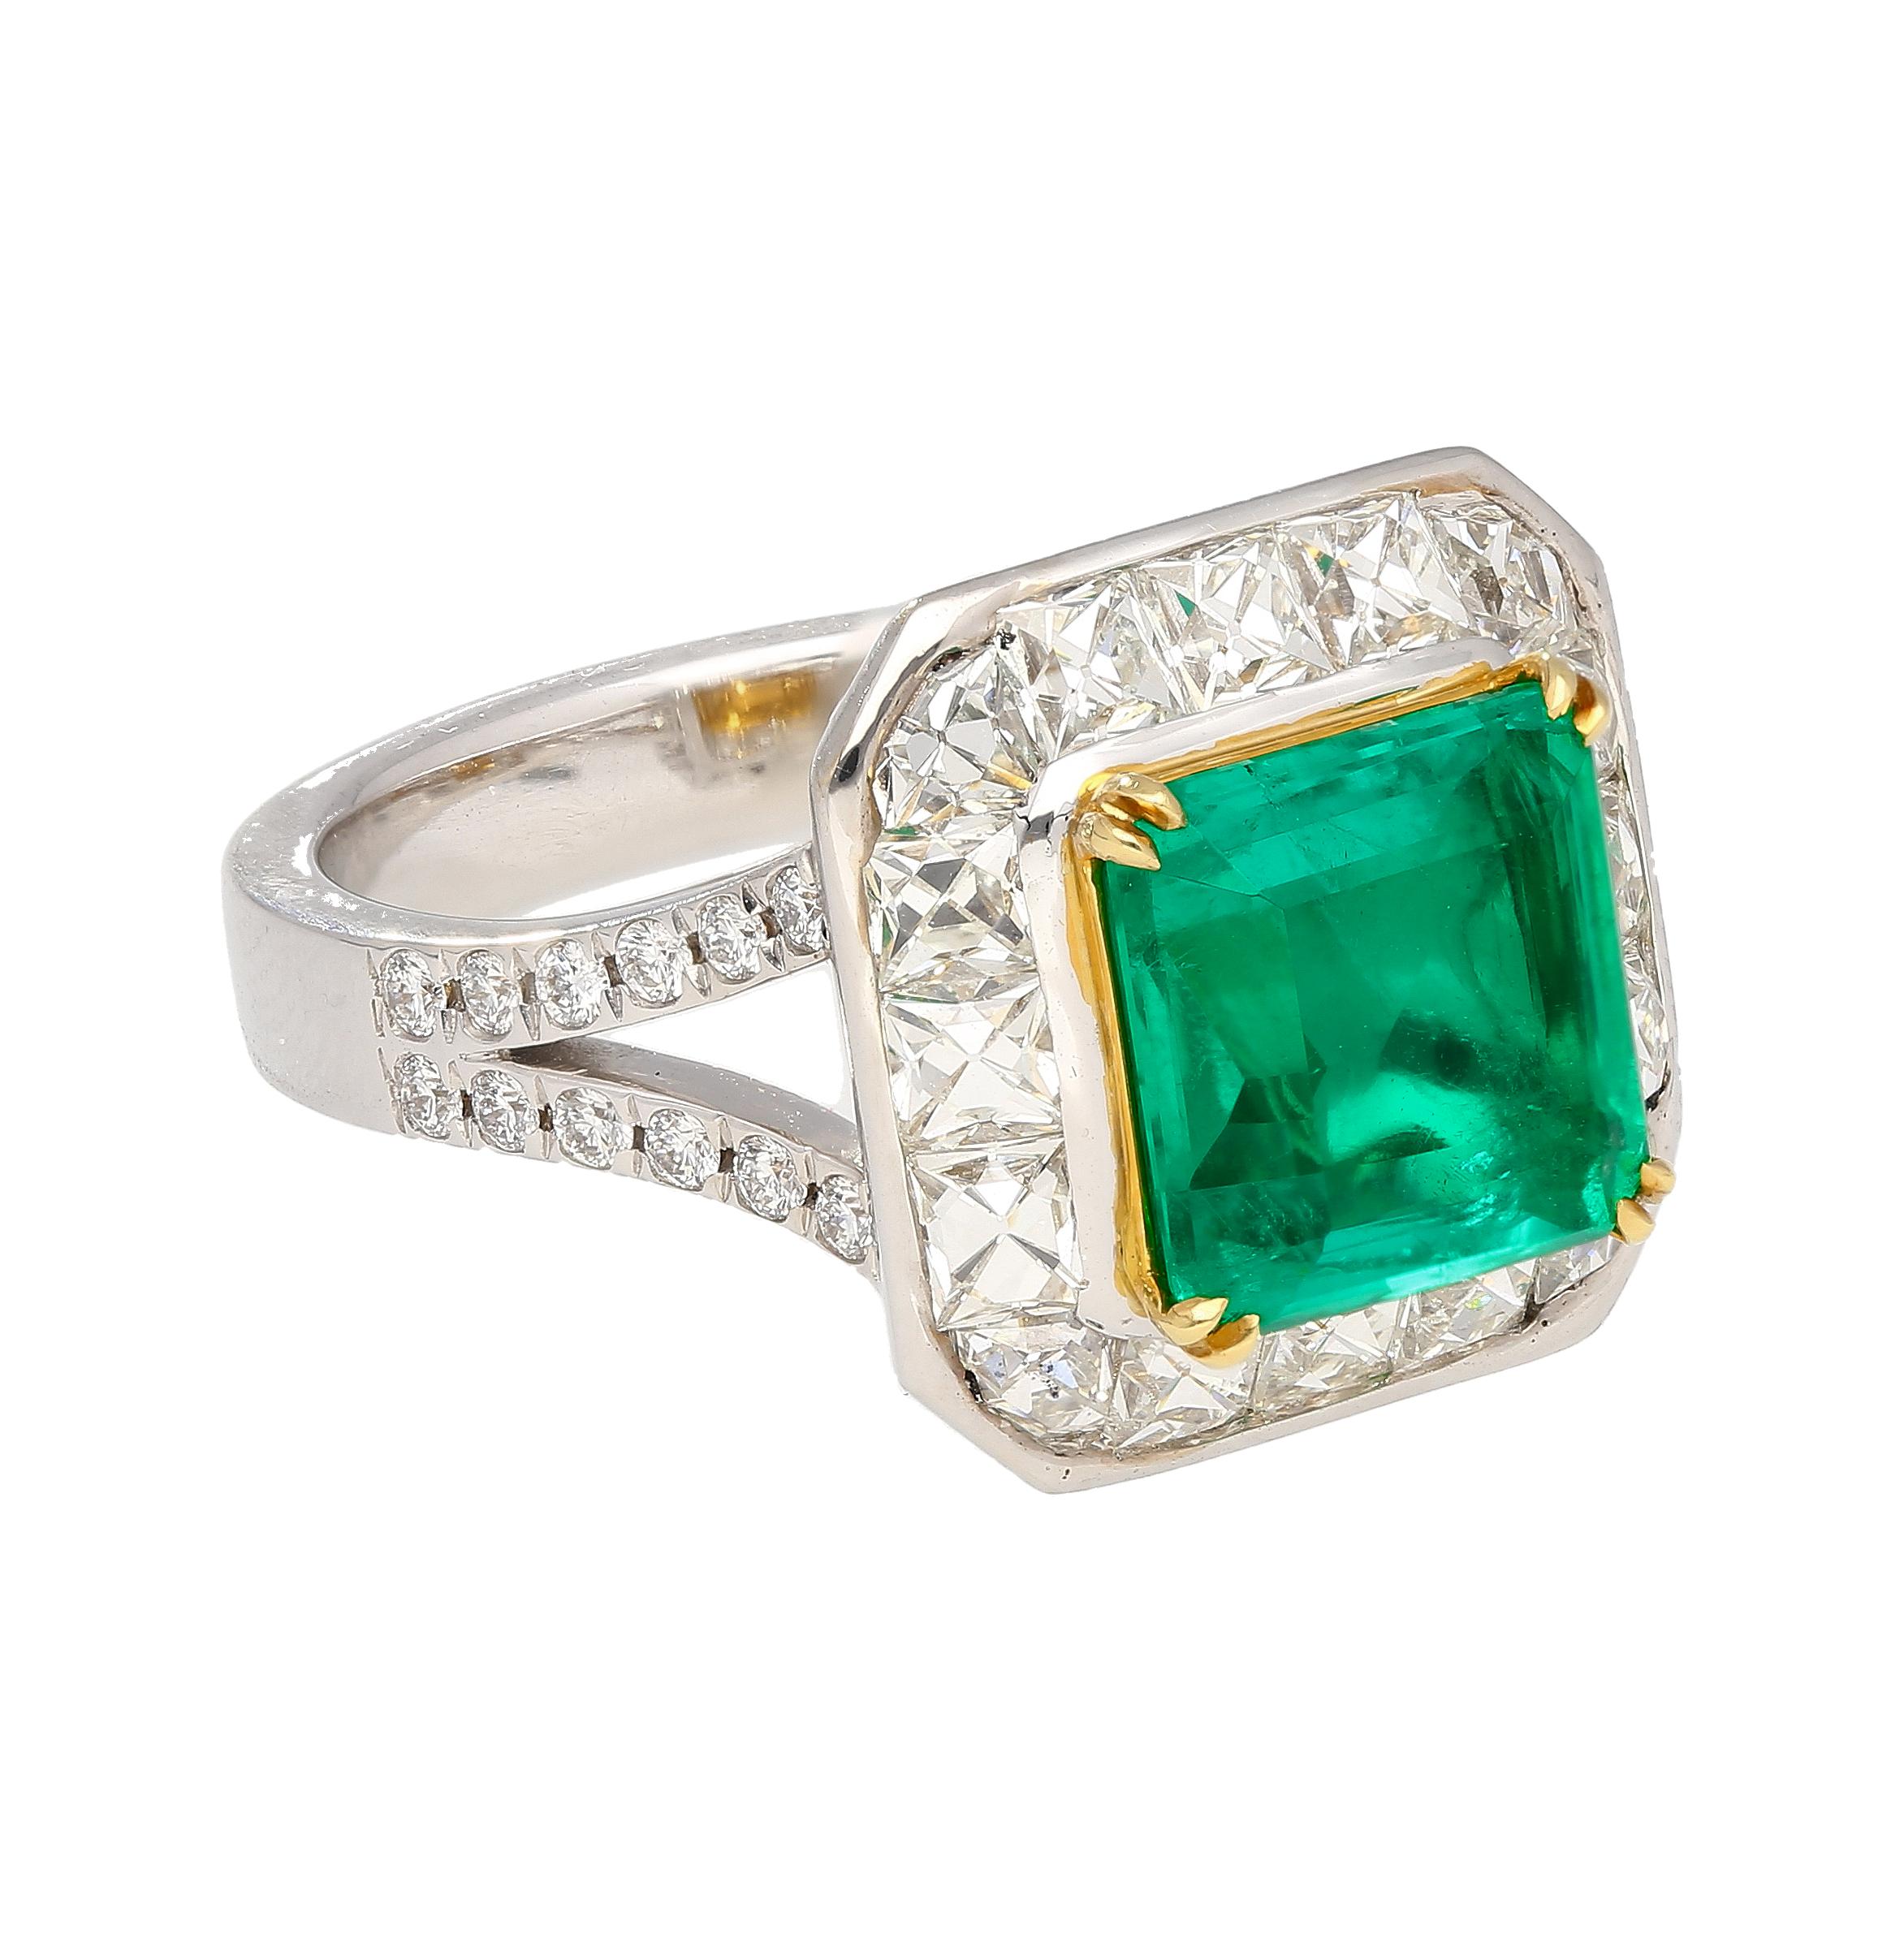 Emerald Cut AGL Certified No Oil 2.54 Carat Colombian Emerald & Old French Cut Diamond Ring For Sale